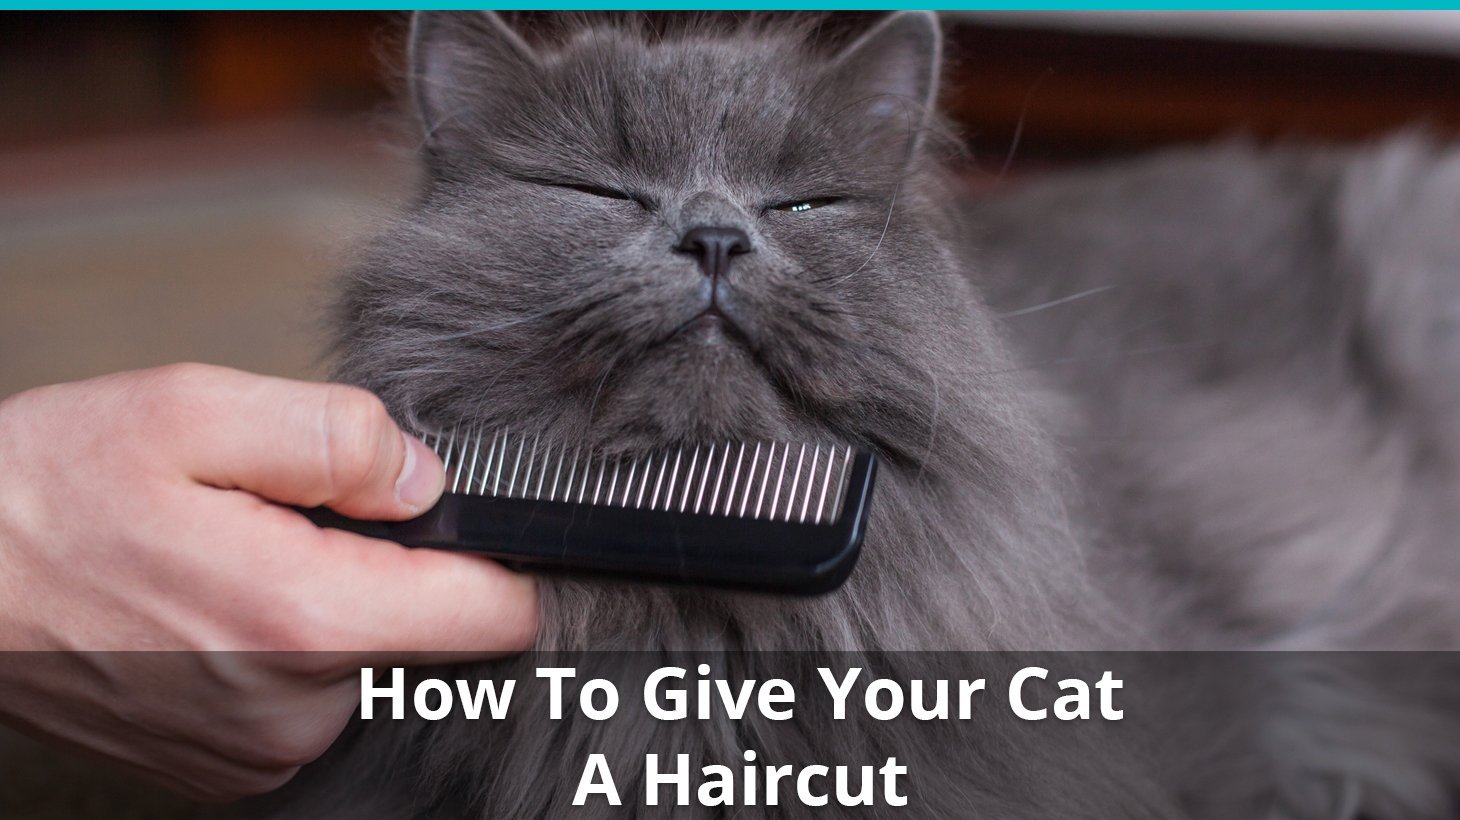 How To Give Your Cat A Haircut (...Carefully!)